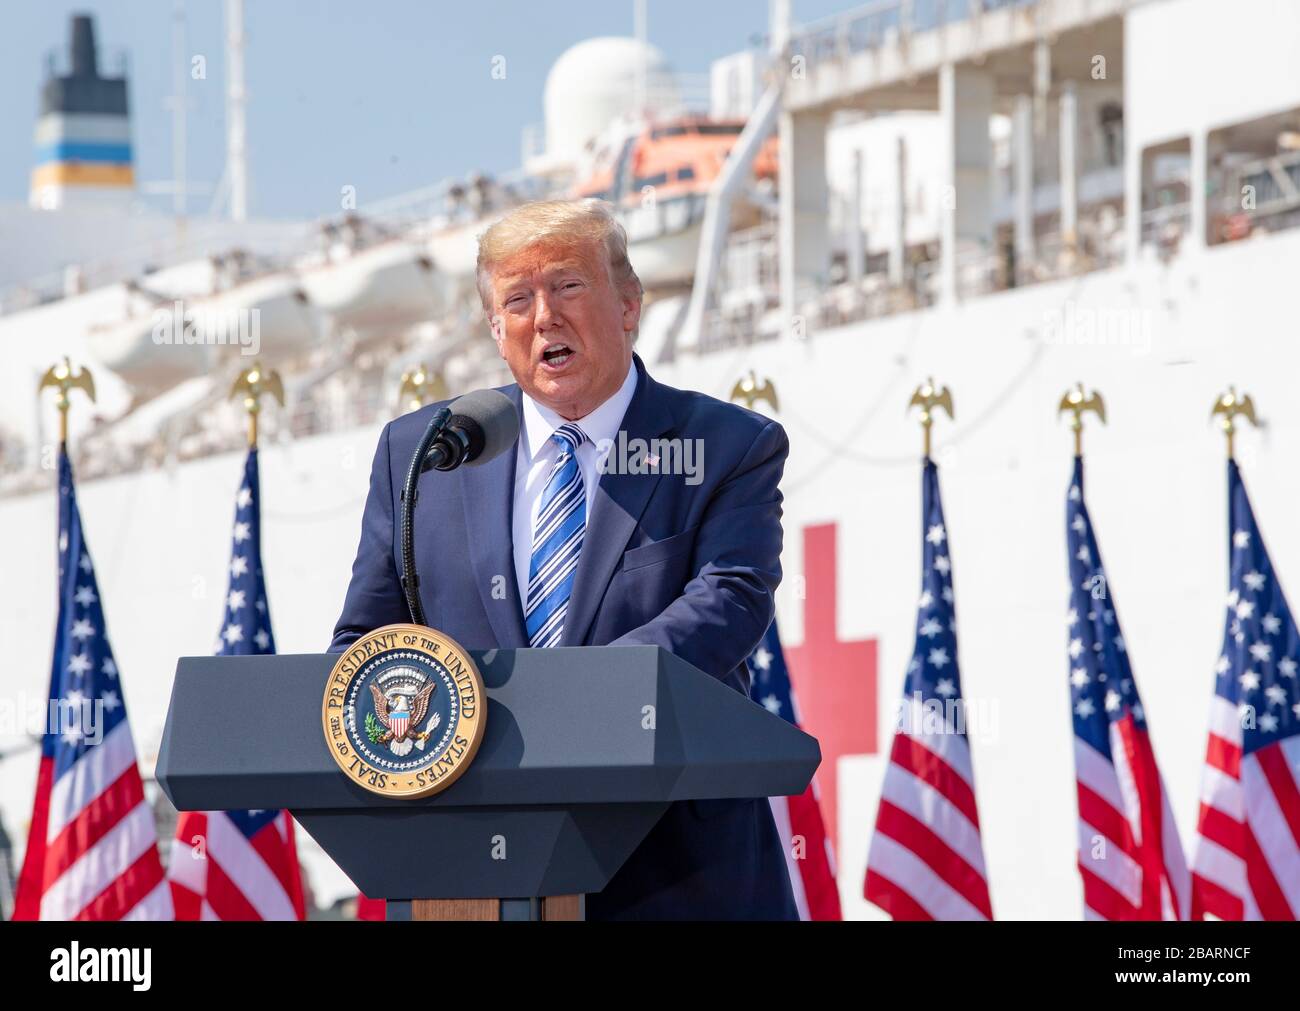 Norfolk, USA. 28th Mar, 2020. Norfolk, USA. 28 March, 2020. U.S President Donald Trump delivers remarks during a visit to see off the Military Sealift Command hospital ship USNS Comfort at Naval Station Norfolk March 28, 2020 in Norfolk, Virginia. The Comfort is deploying to New York in support of the nation's COVID-19 response efforts. Credit: Mike DiMestico/U.S. Navy Photo/Alamy Live News Stock Photo